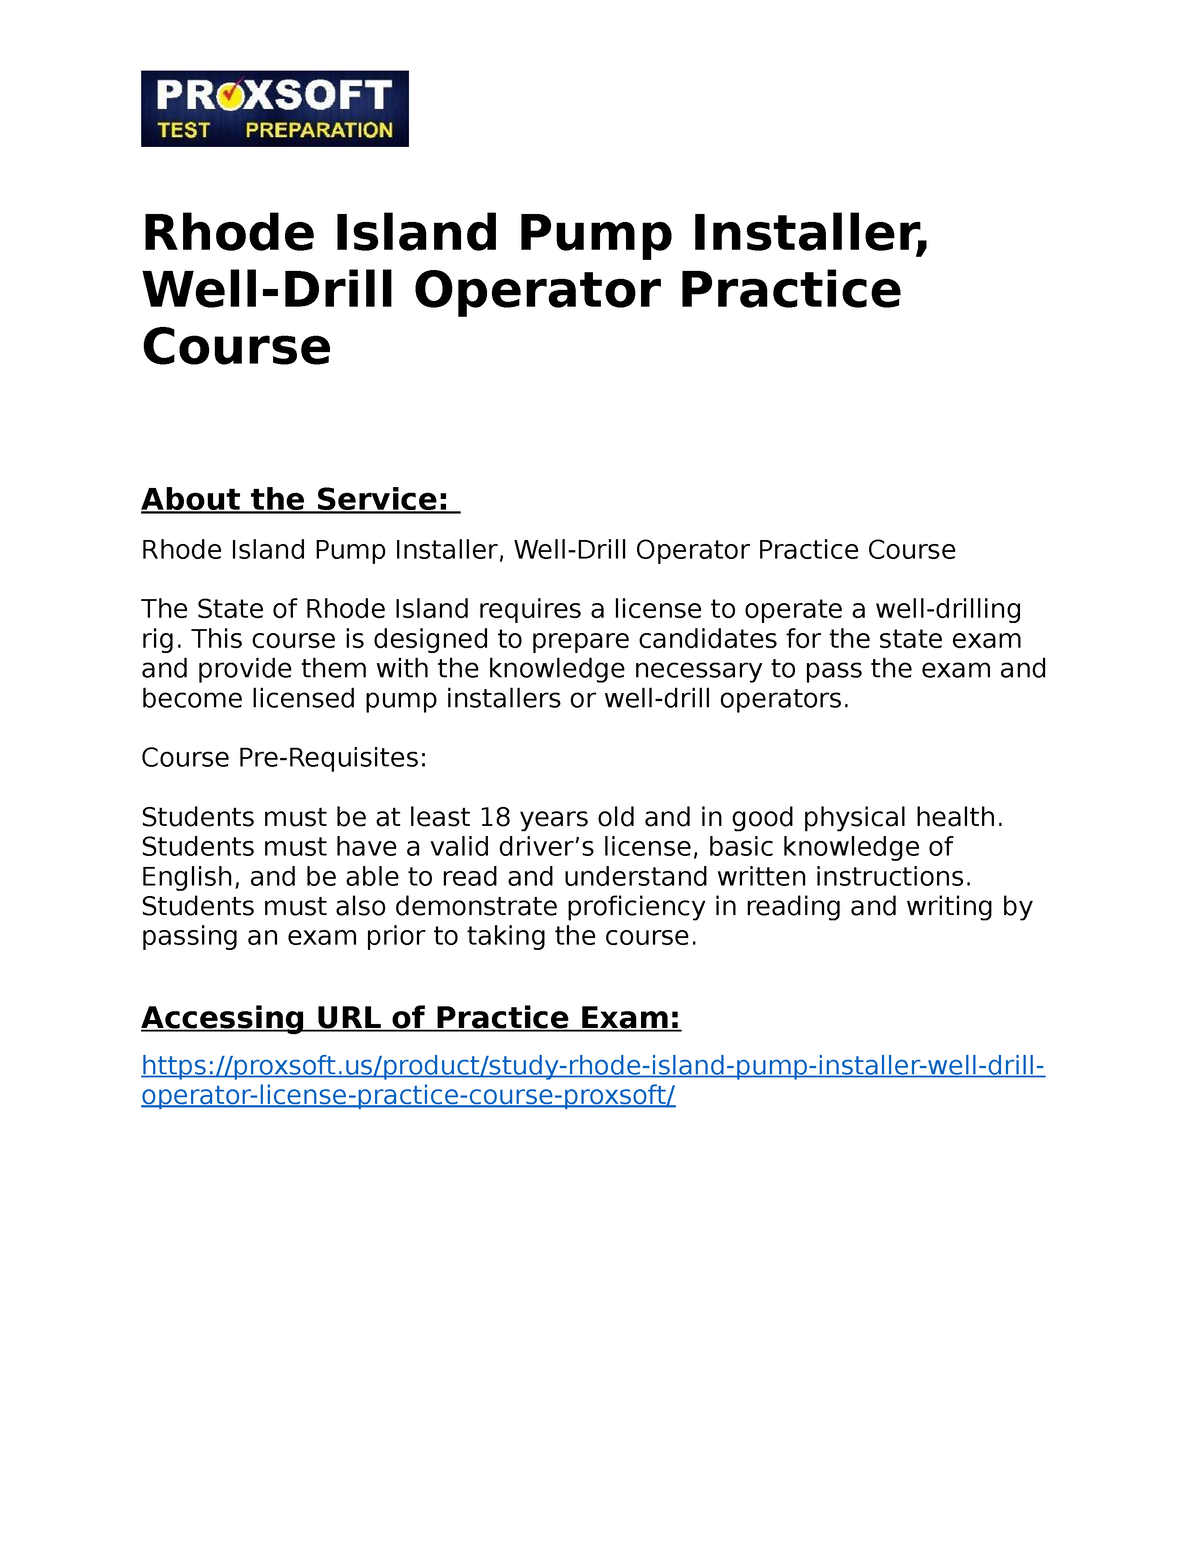 Rhode Island residential appliance installer license prep class for windows download free